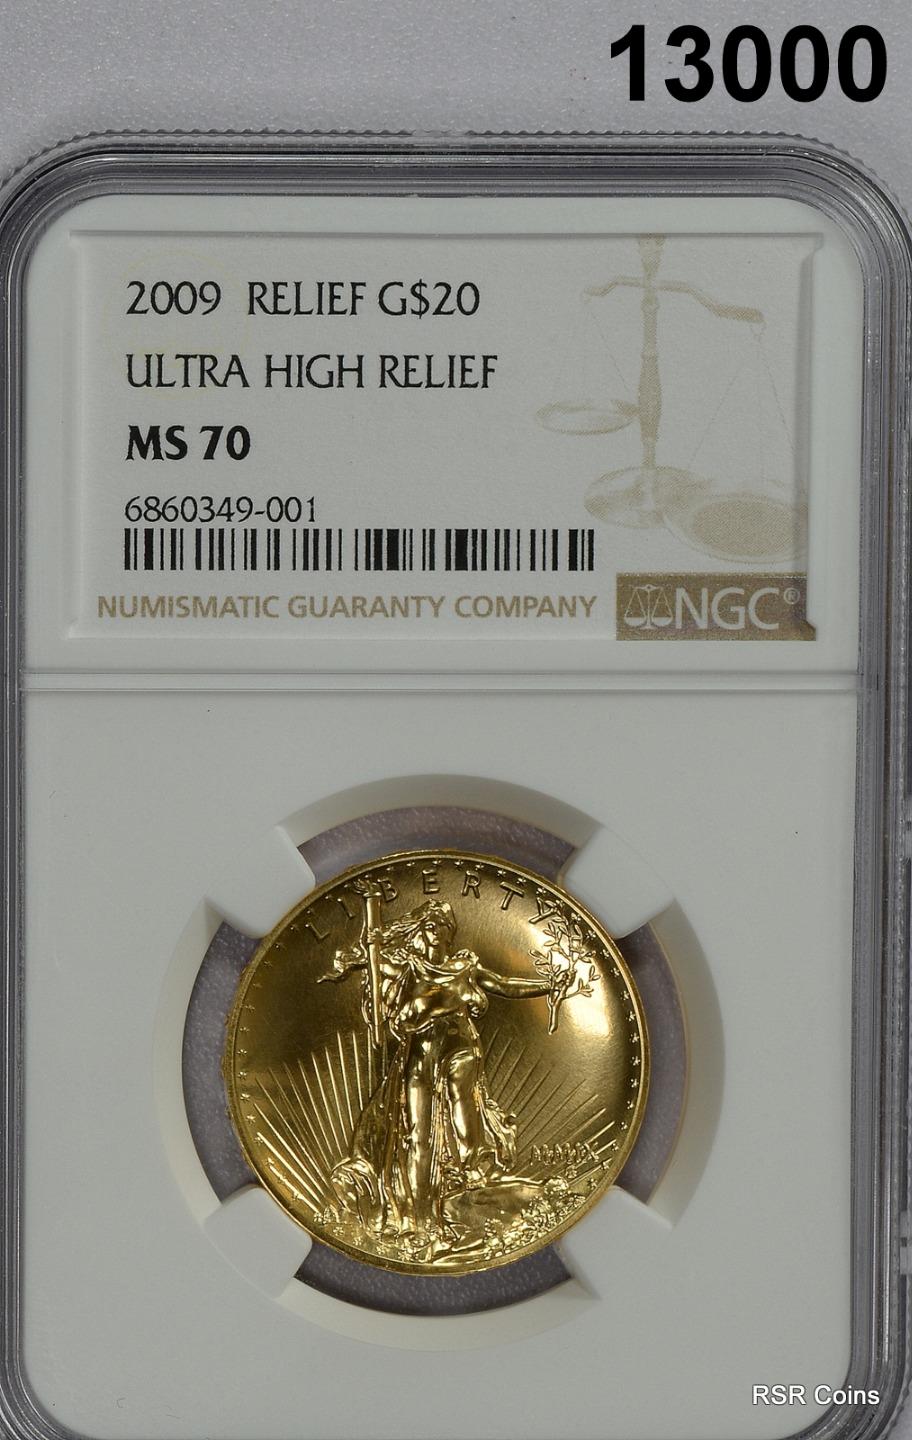 2009 ULTRA HIGH RELIEF G $20 ST GAUDENS NGC CERTIFIED MS70 SEMI PL PERFECT#13001